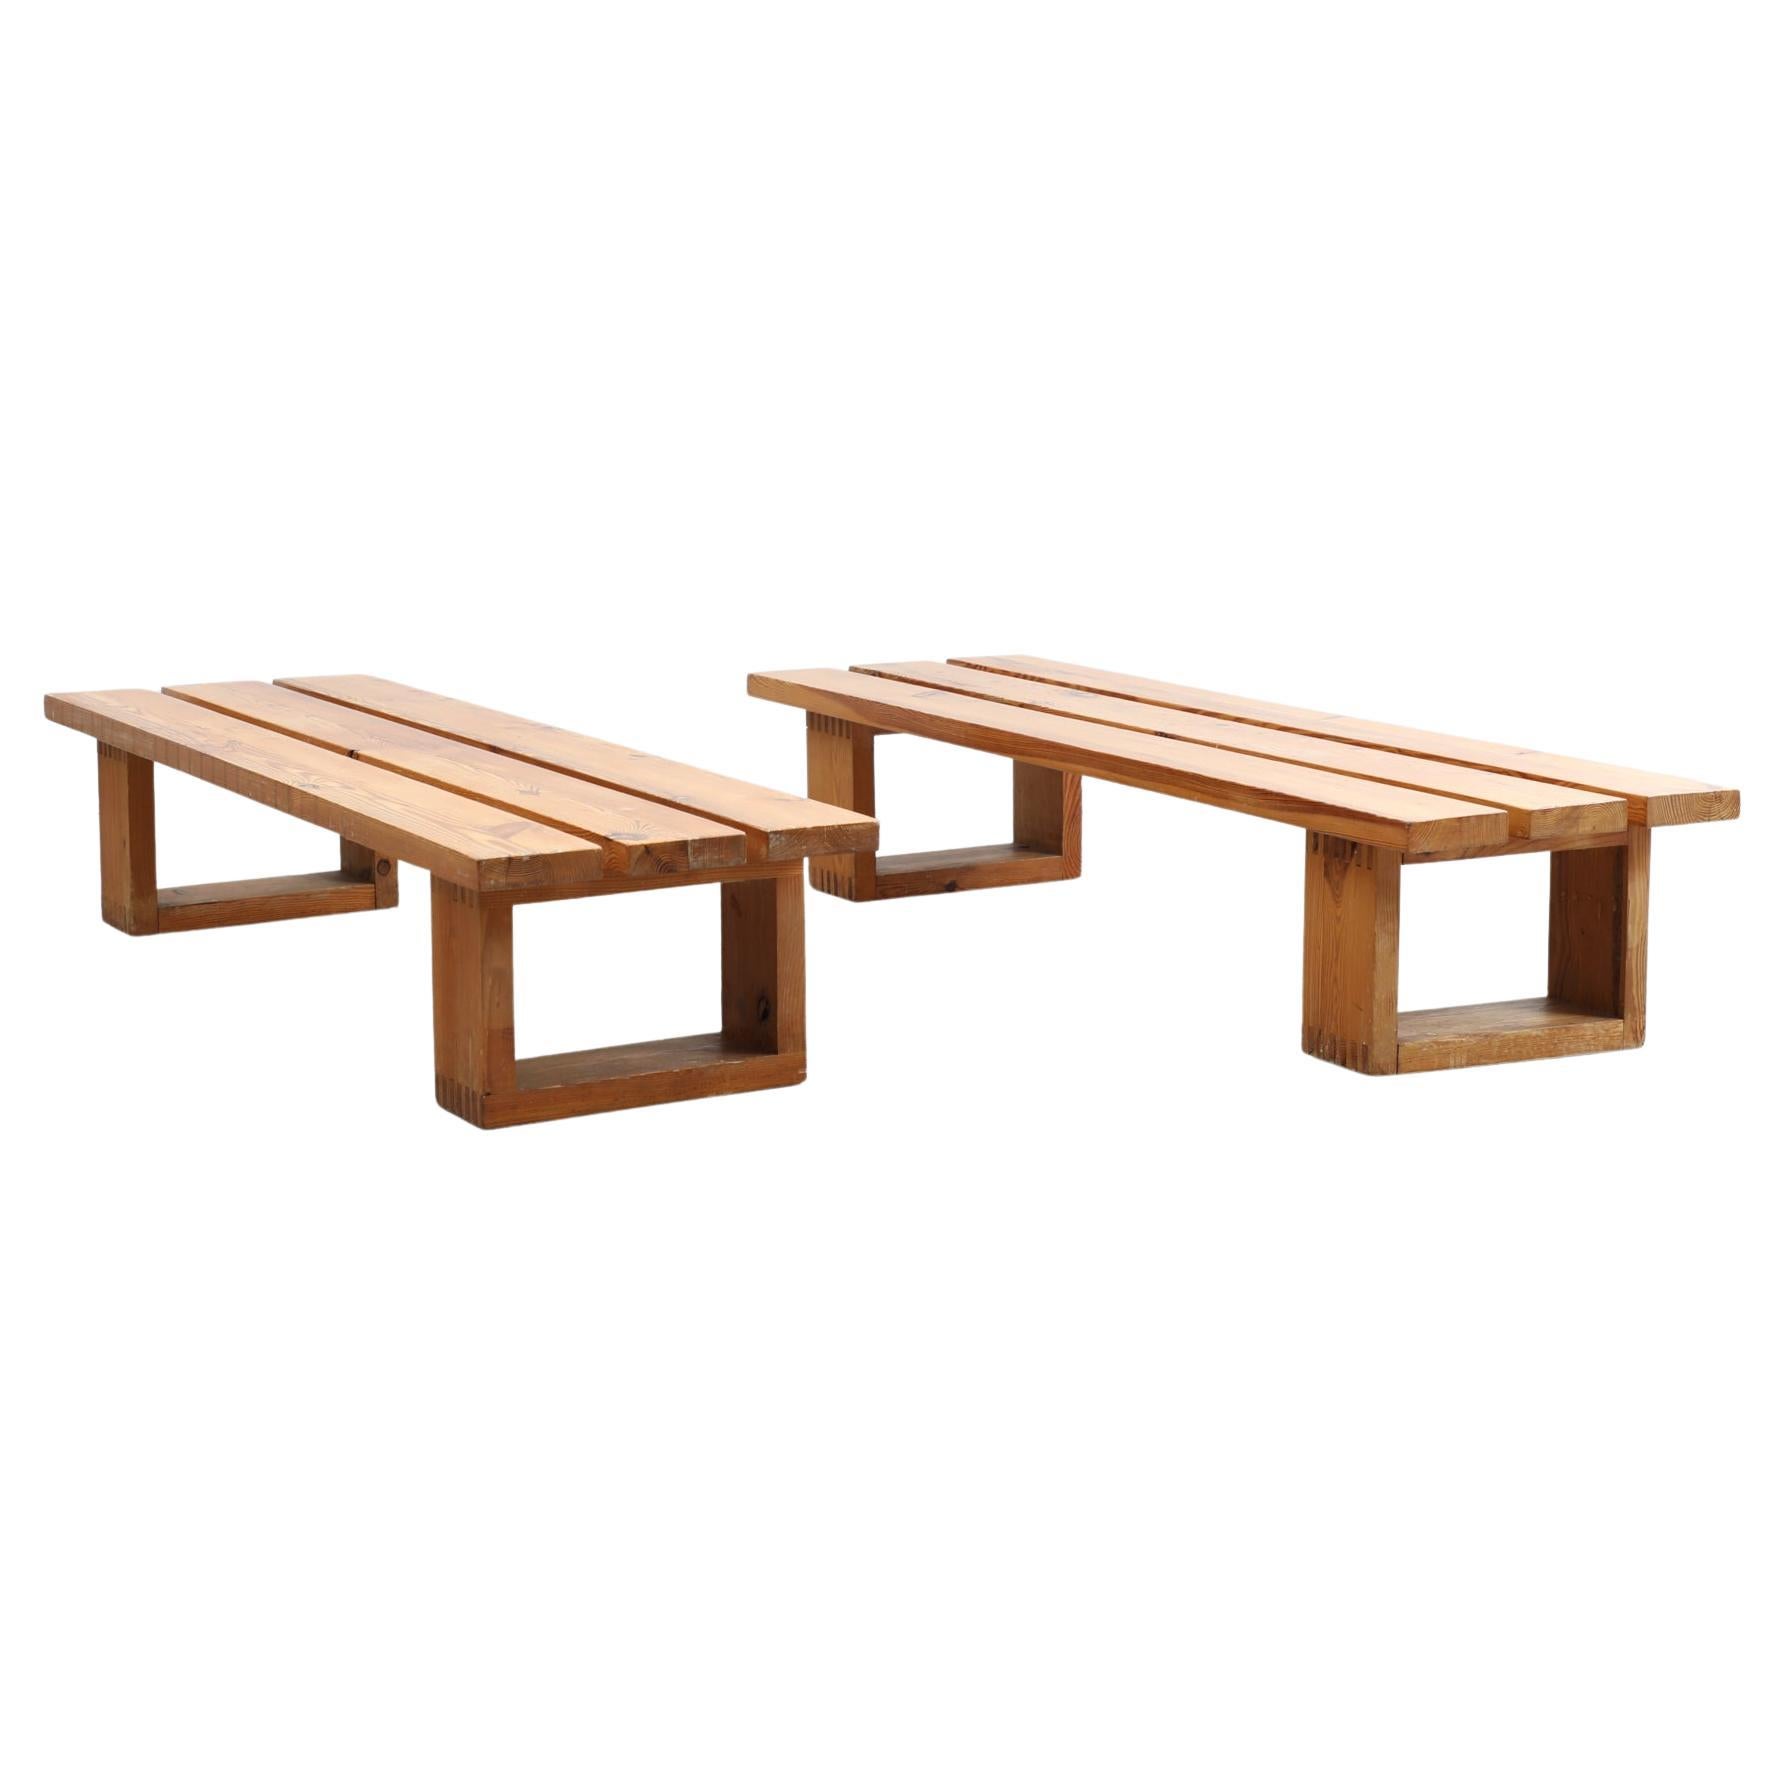 Ate van Apeldoorn Heavy Pine Slat Benches w/ Square Legs & Box Joints For Sale